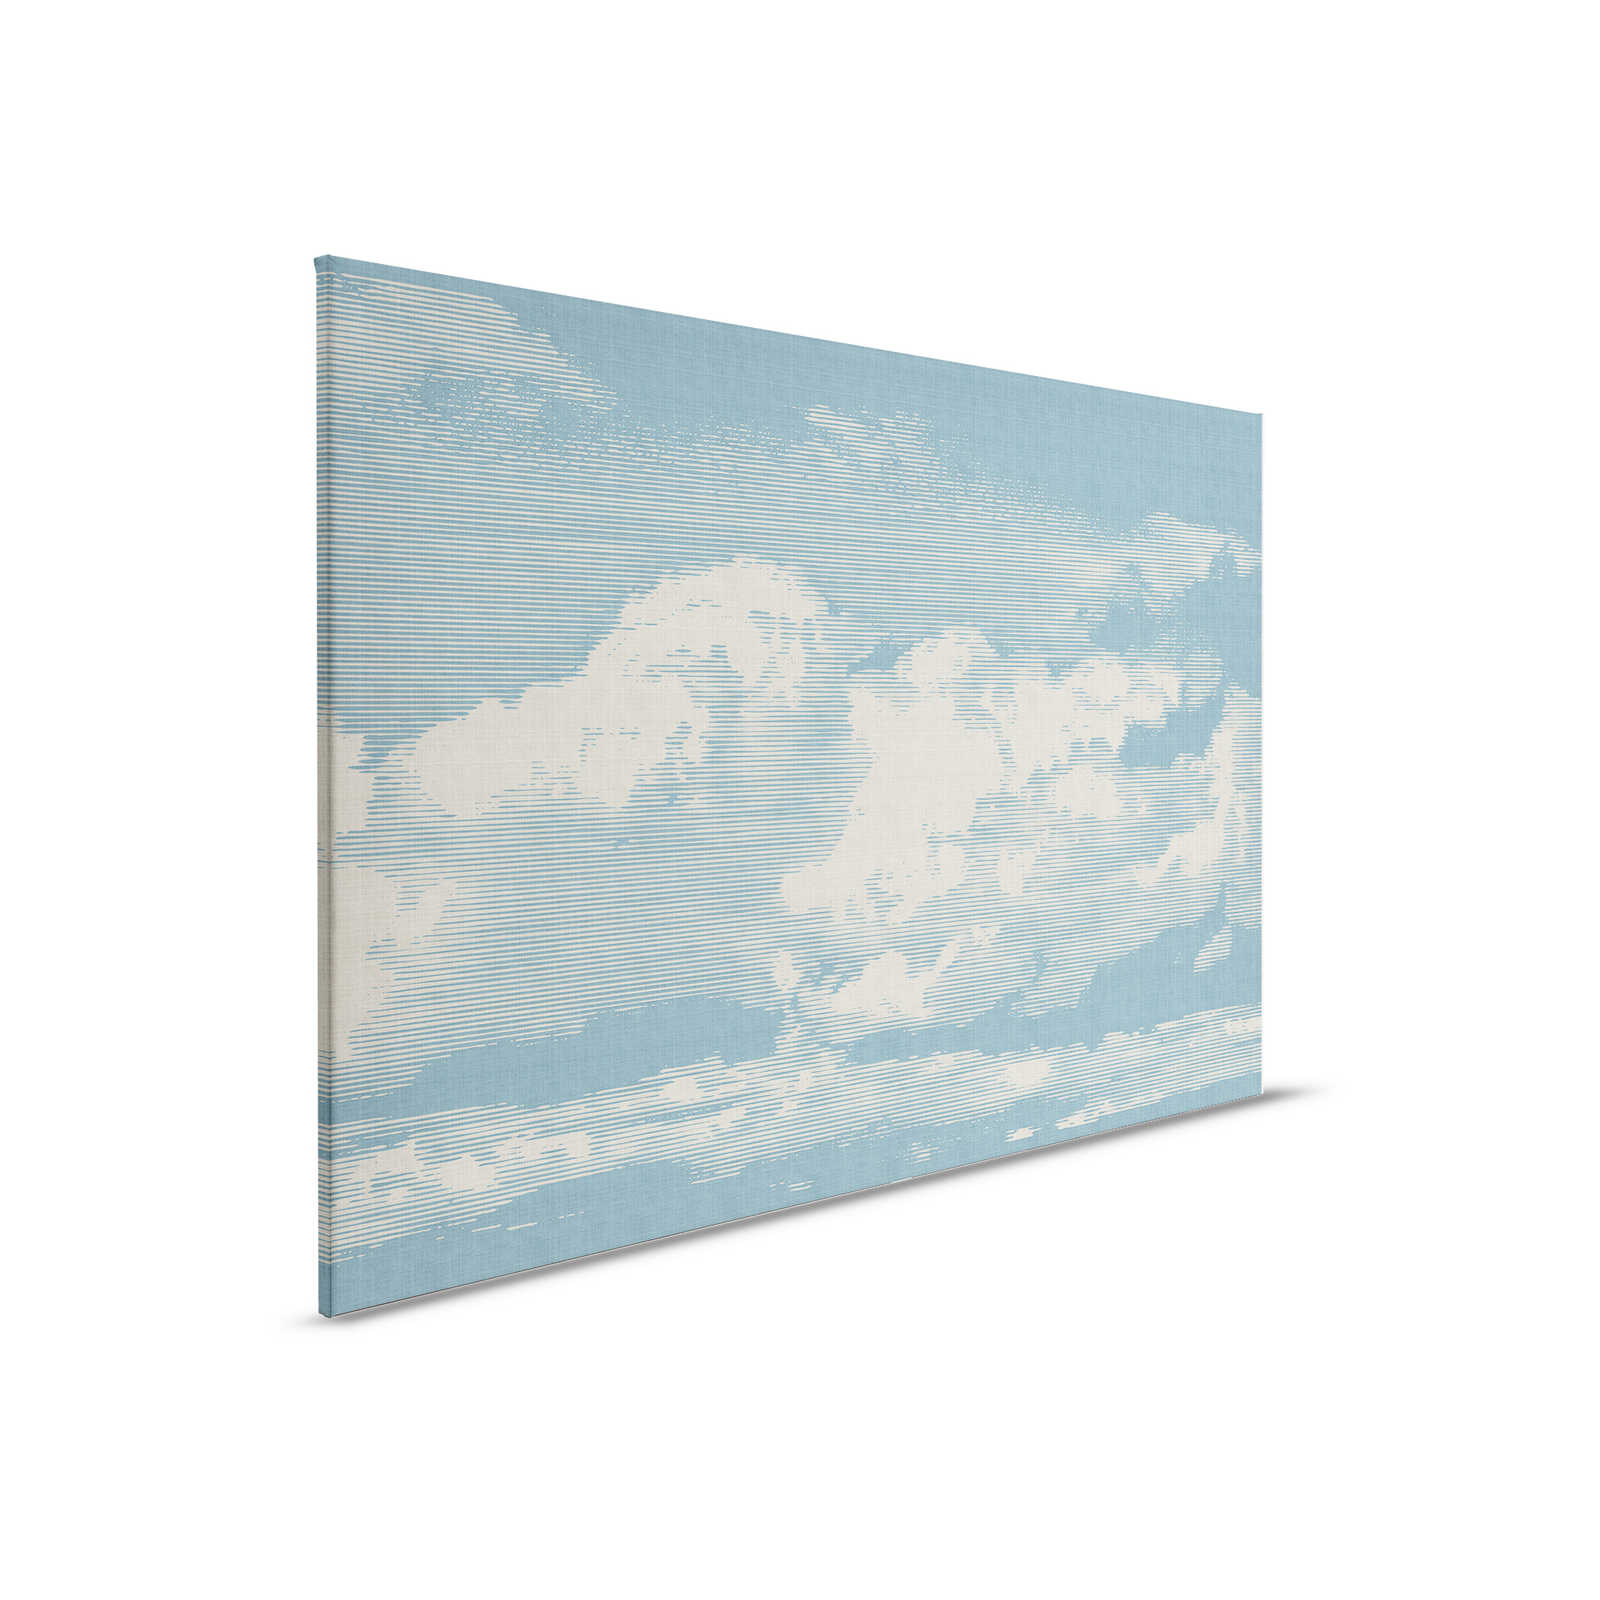 Clouds 1 - Heavenly canvas picture with cloud motif in natural linen look - 0.90 m x 0.60 m
